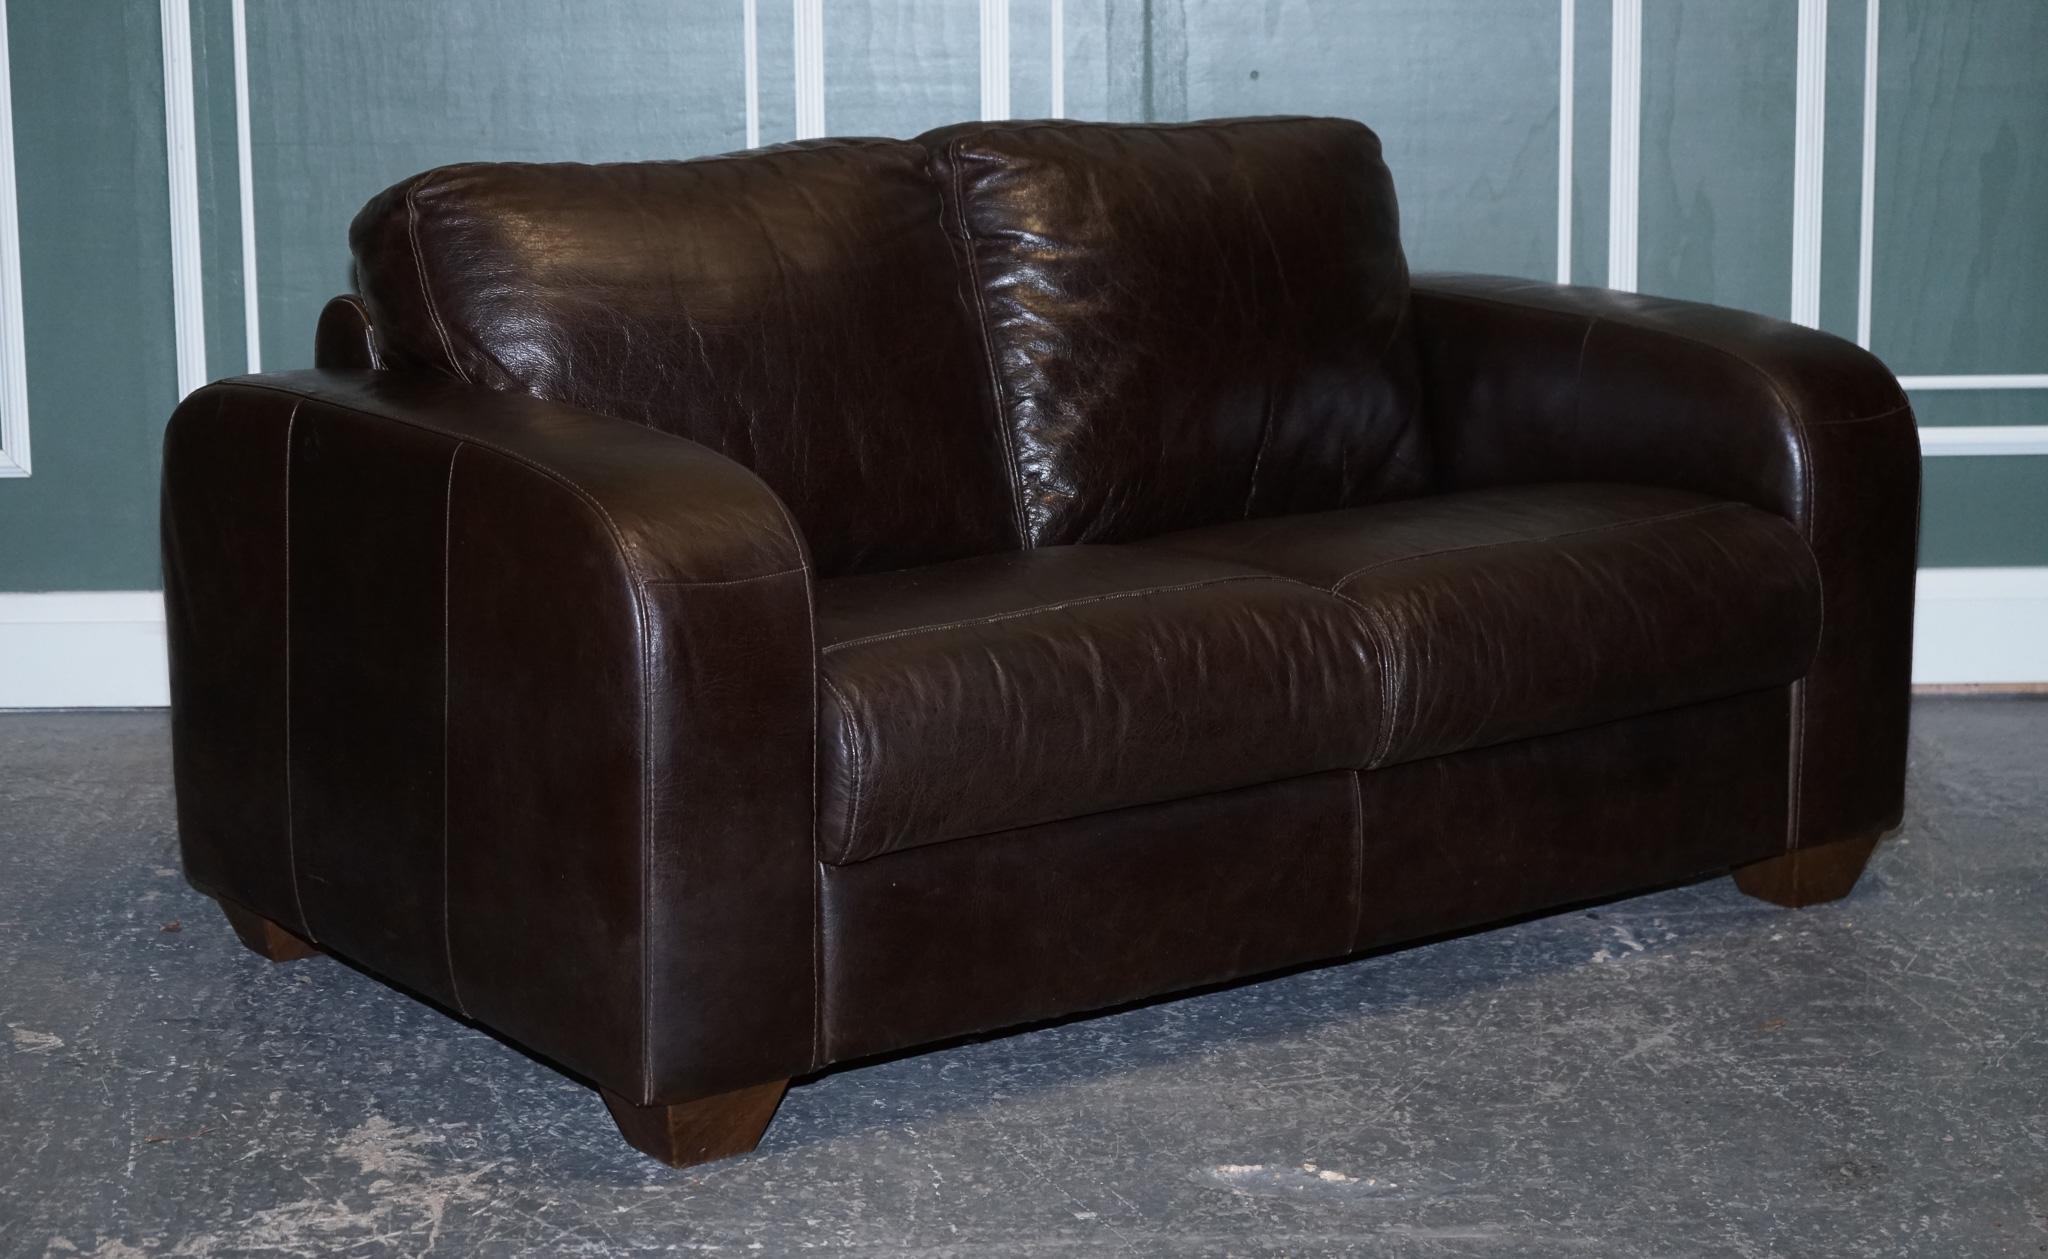 We are delighted to Present This Stunning Chocolate Brown Leather Two Seater Sofa.

The sofa is made by Sofitalia which is an established Italian company, the leather is of very good Italian cow-hide quality and still has plenty of life to